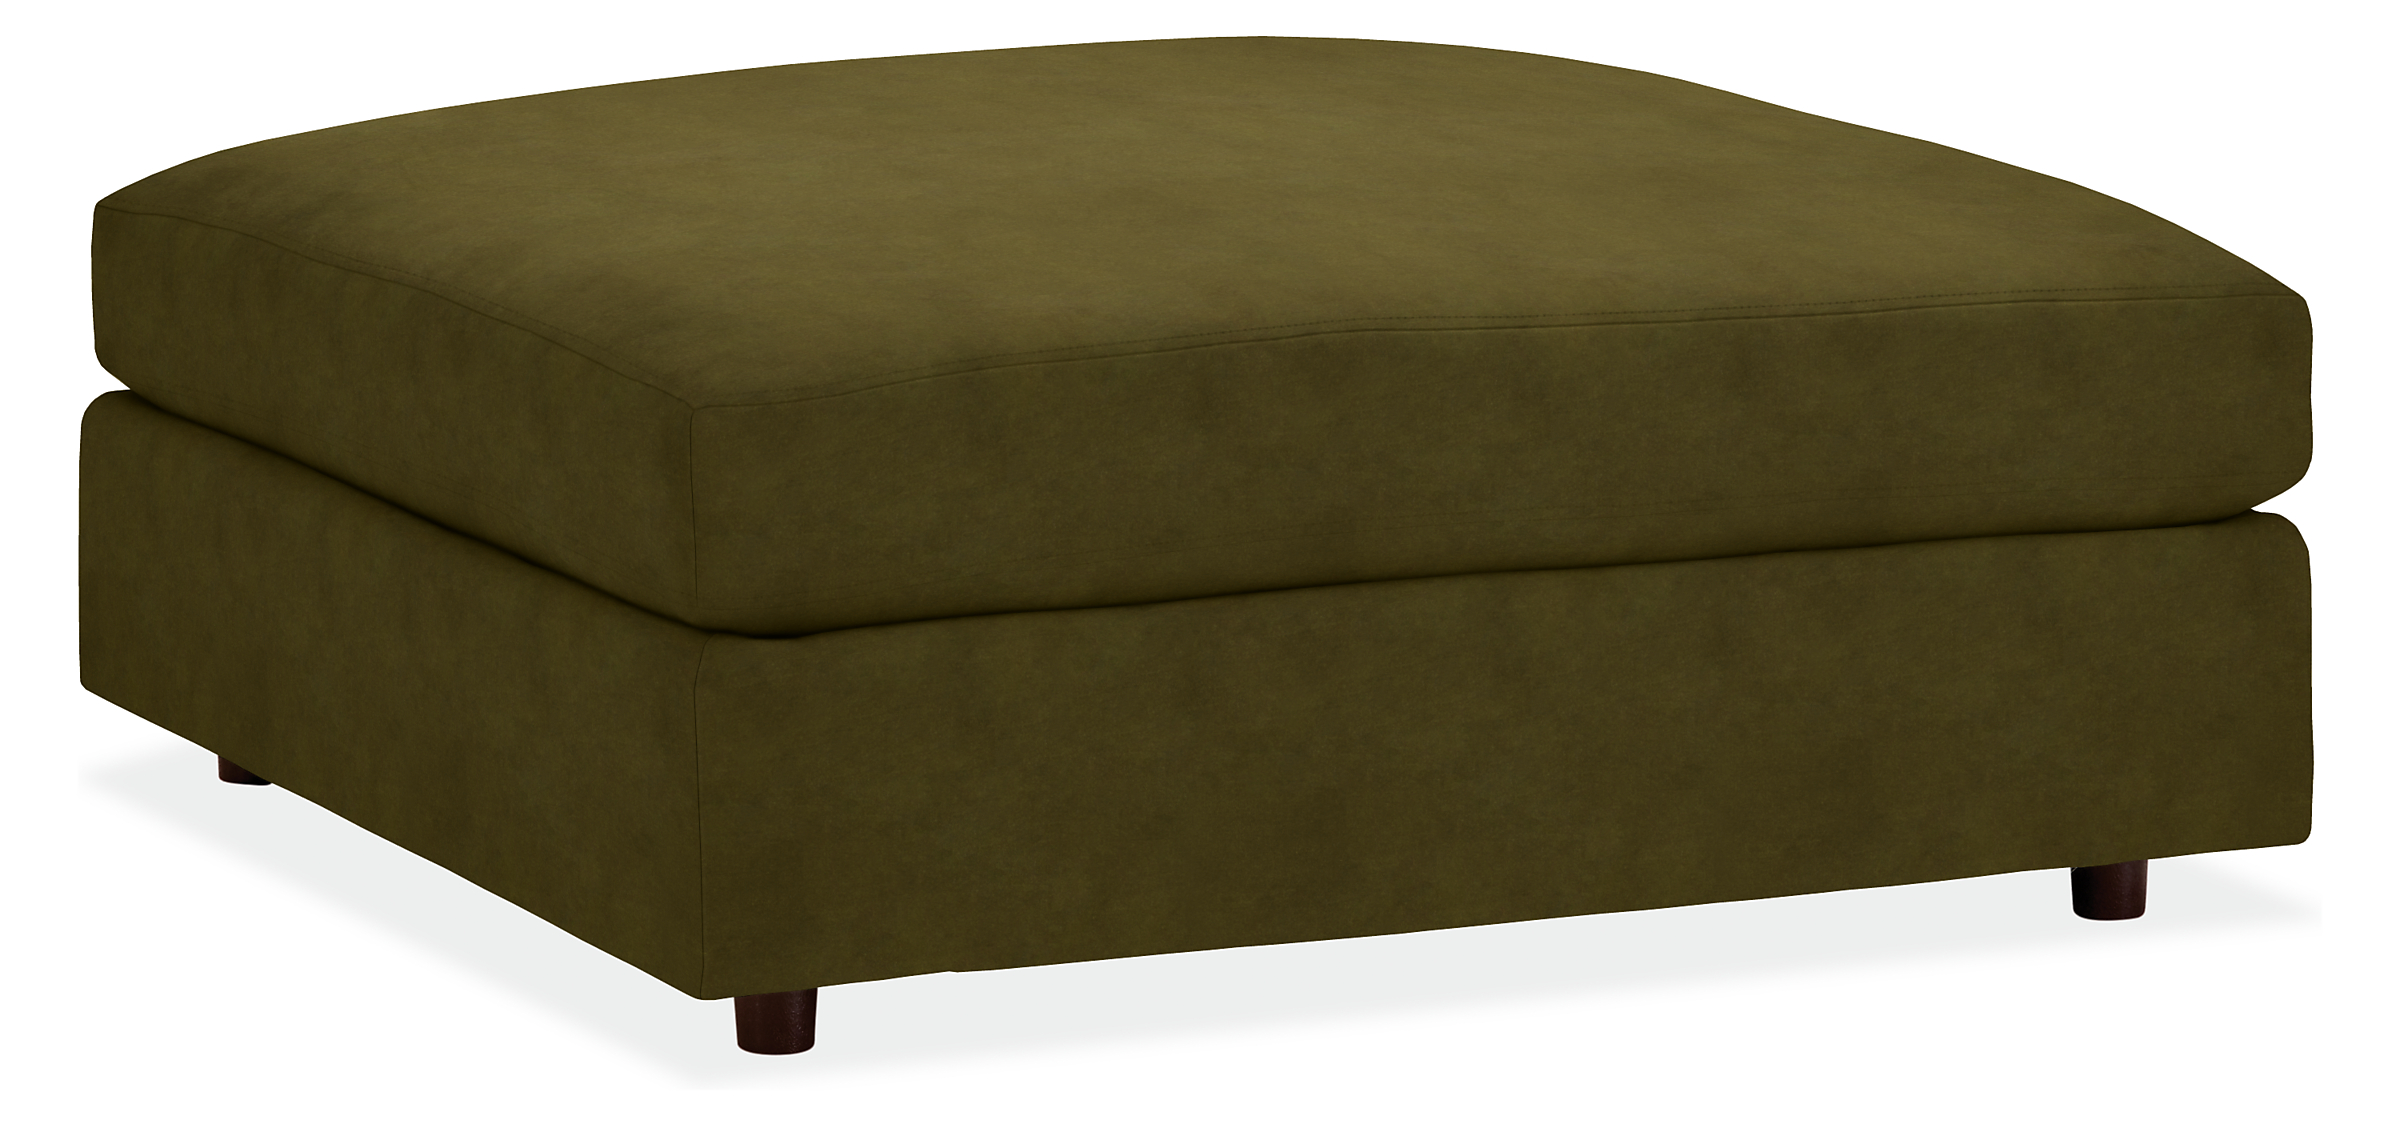 Linger Deep 43w 43d 17h Square Ottoman in Vance Olive